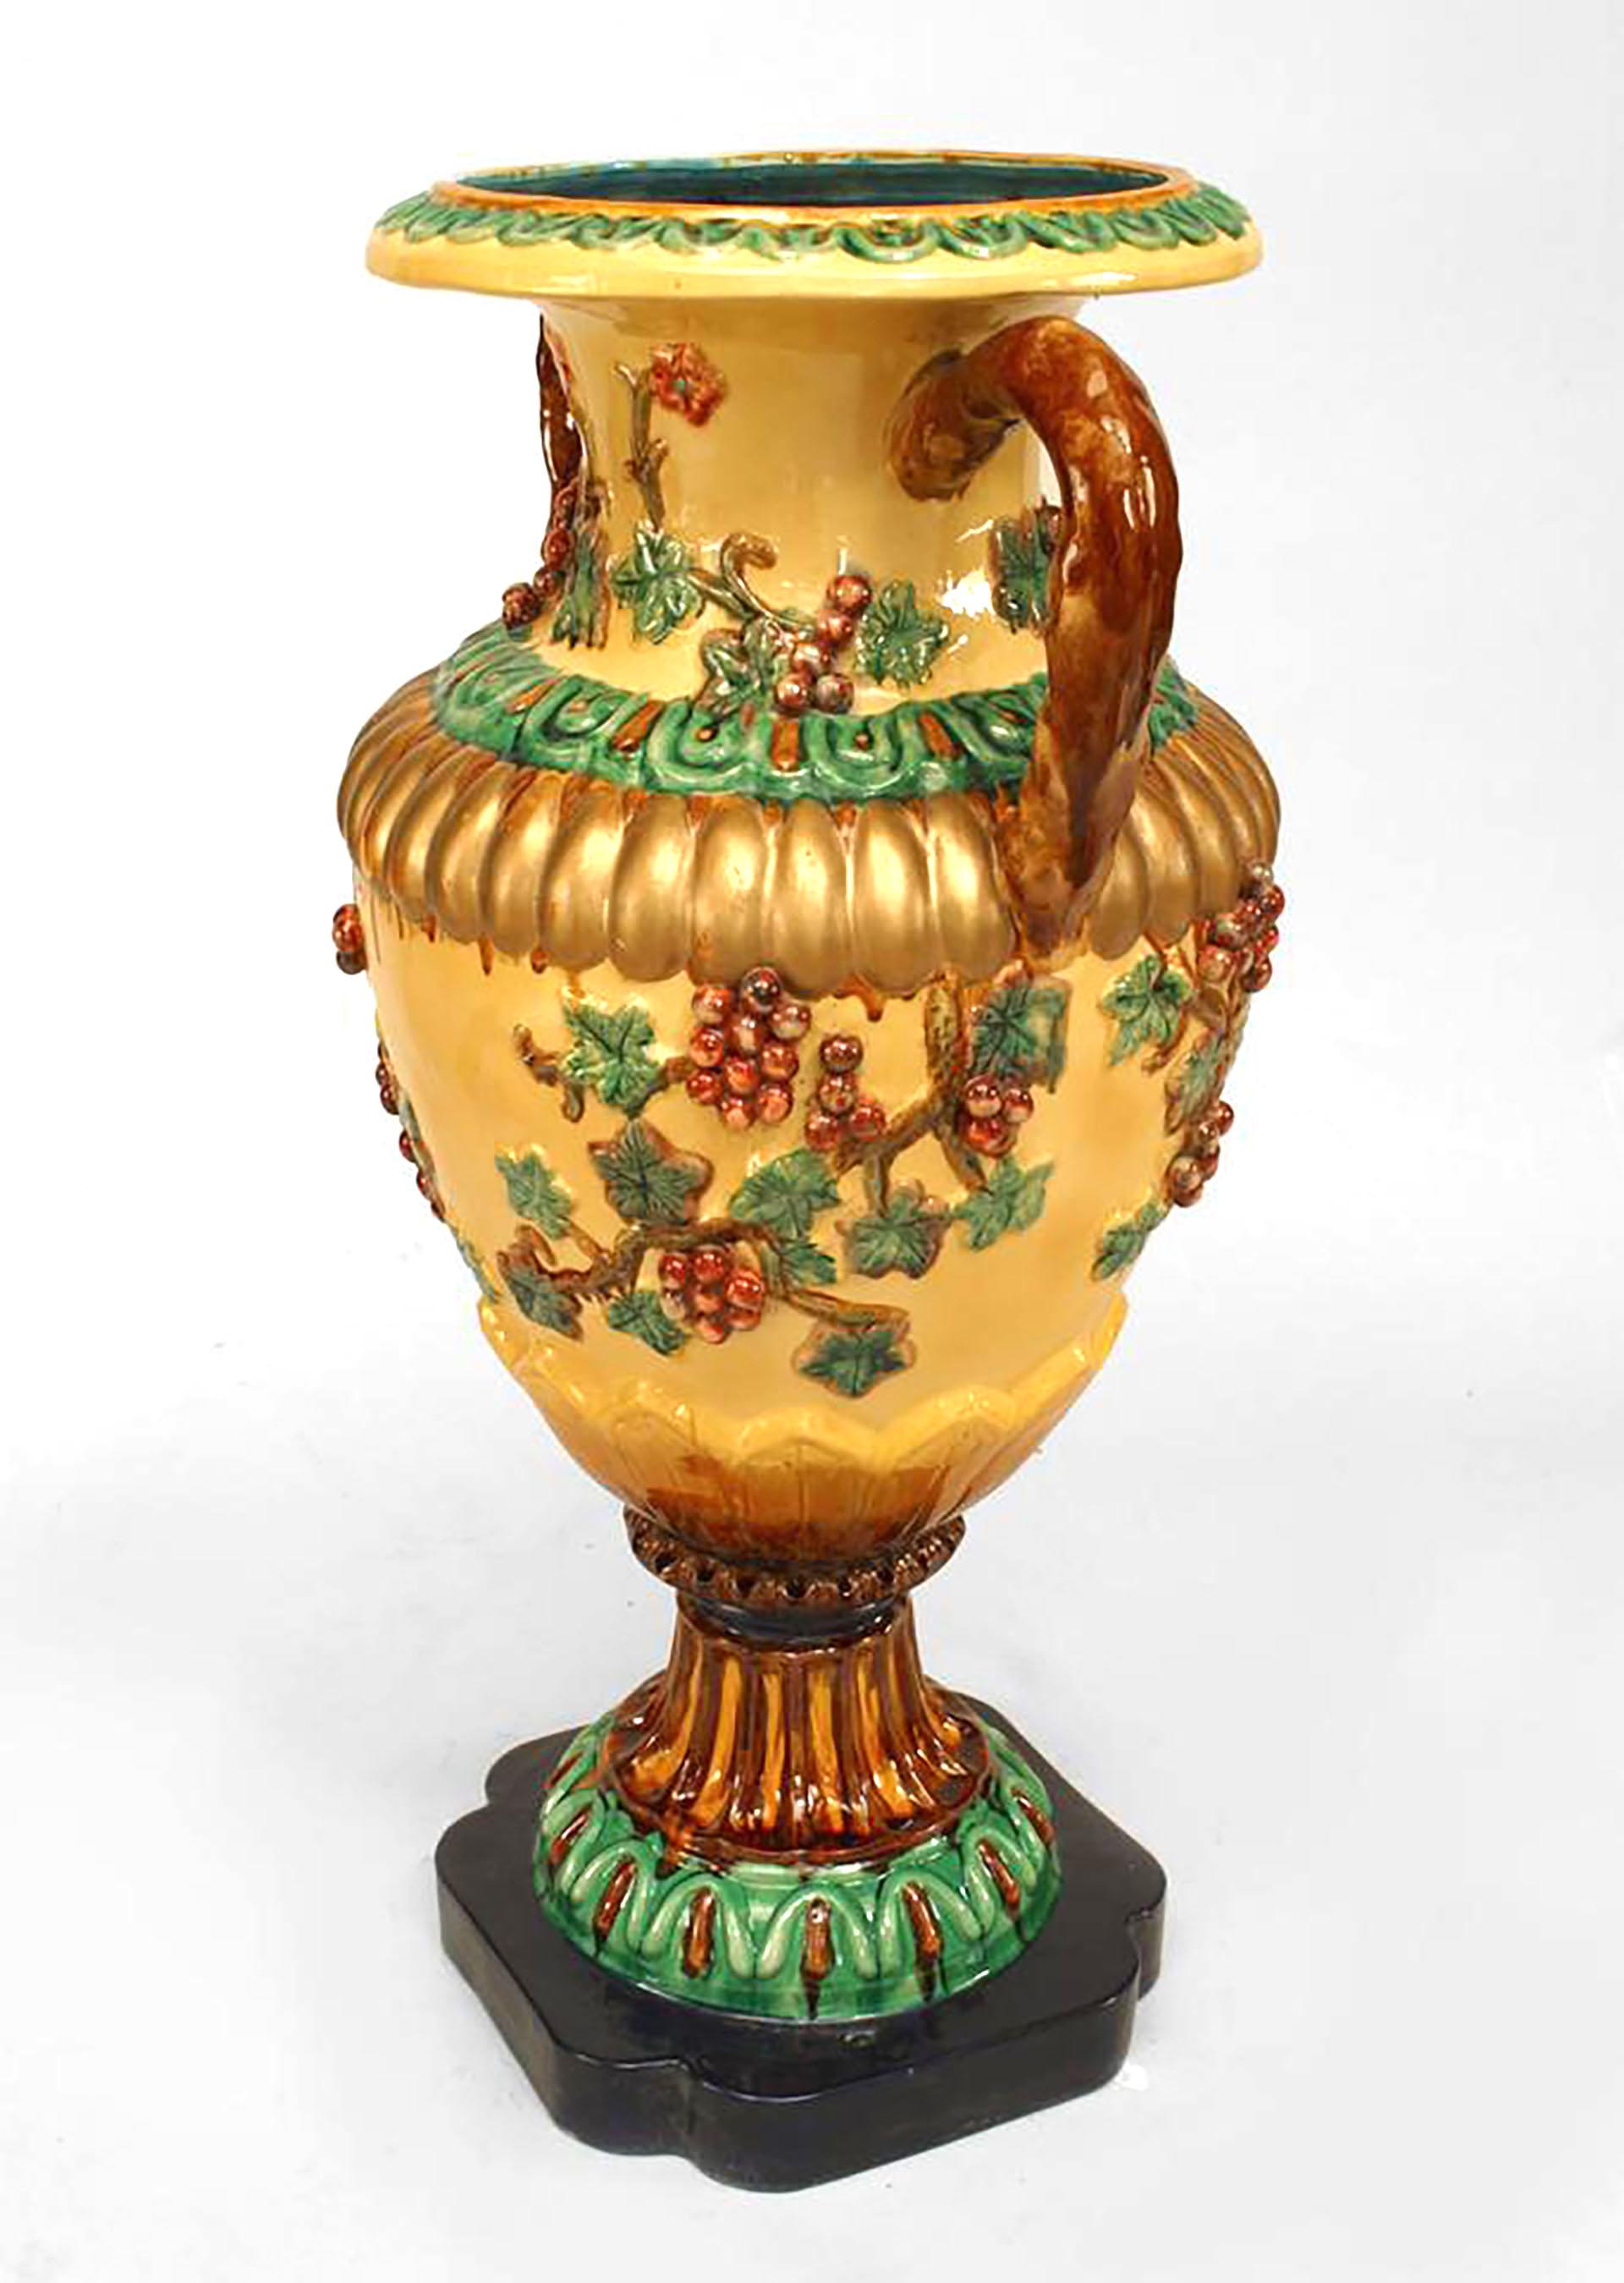 Pair of italian Neo-Classic style (19/20th century) Majolica style glazed yellow & green porcelain floor vases. With large brown handles and floral decoration with grapes in relief on a square blue base. (priced as pair).
  